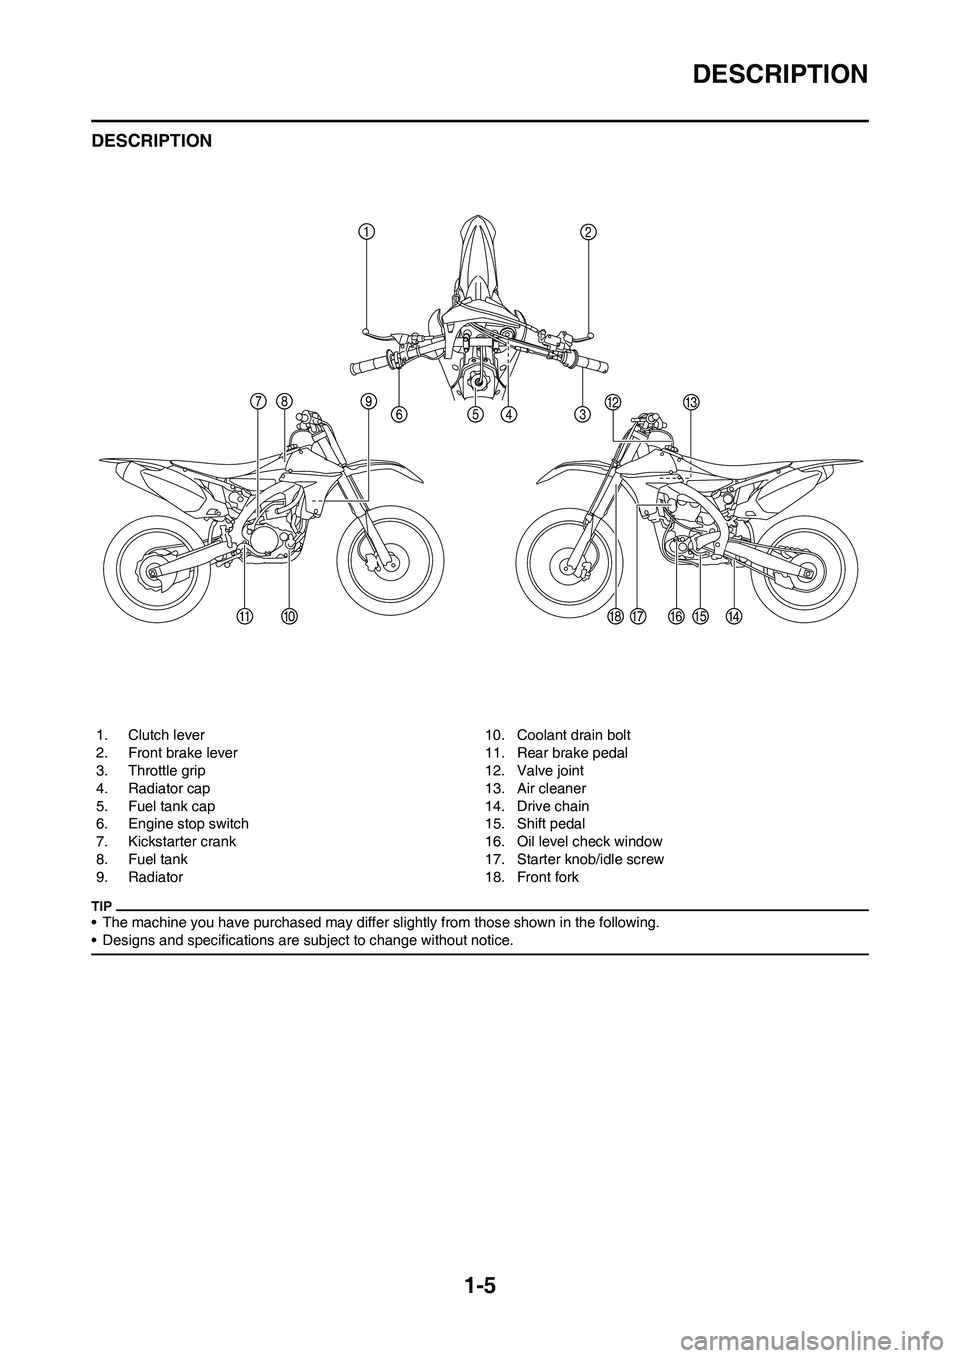 YAMAHA YZ450F 2010 User Guide 1-5
DESCRIPTION
DESCRIPTION
• The machine you have purchased may differ slightly from those shown in the following.
• Designs and specifications are subject to change without notice.
1. Clutch lev